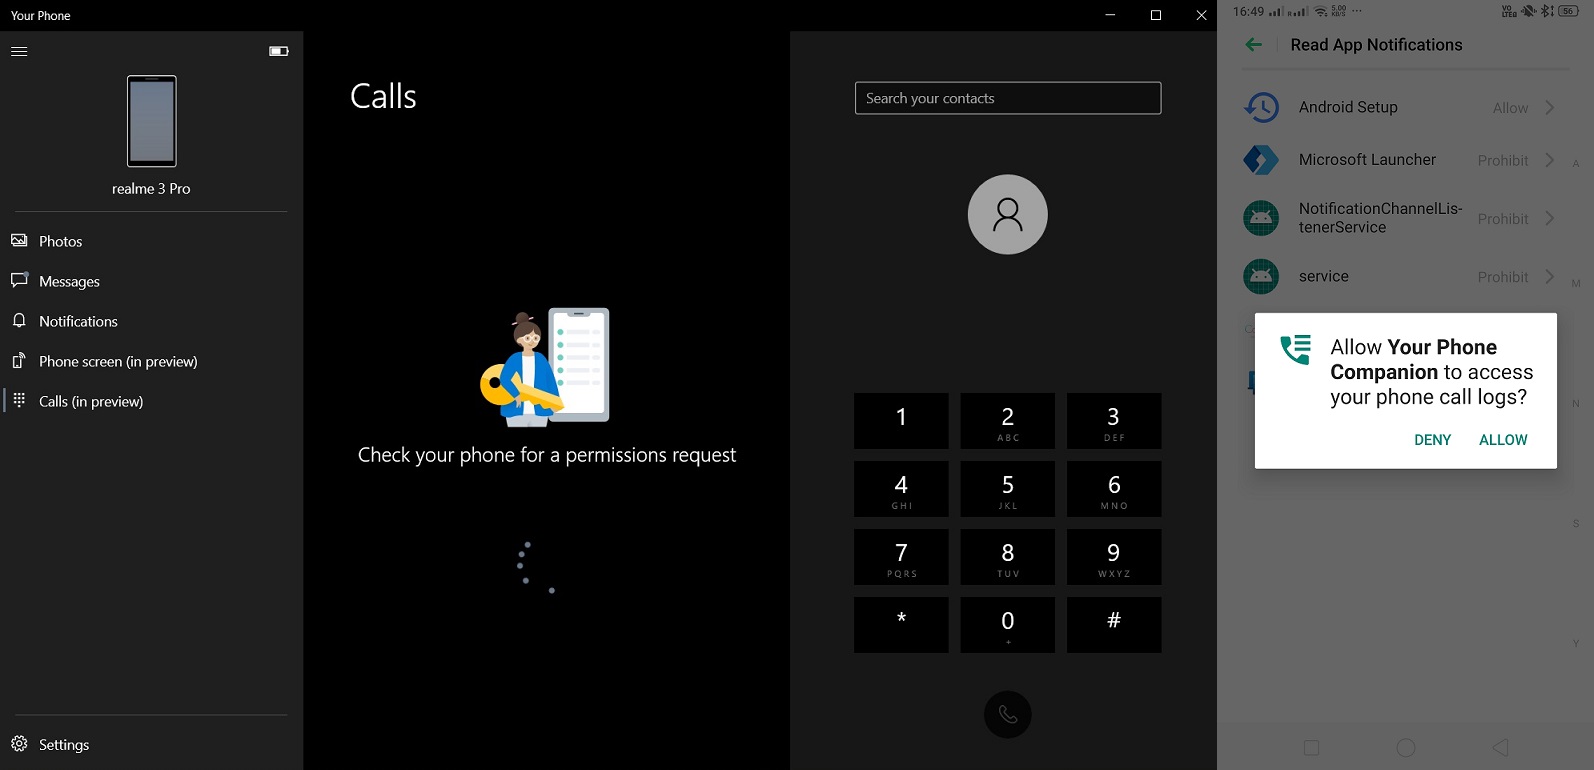 Hands-on with Windows 10’s Android phone calling feature Your-Phone-app-permission.jpg